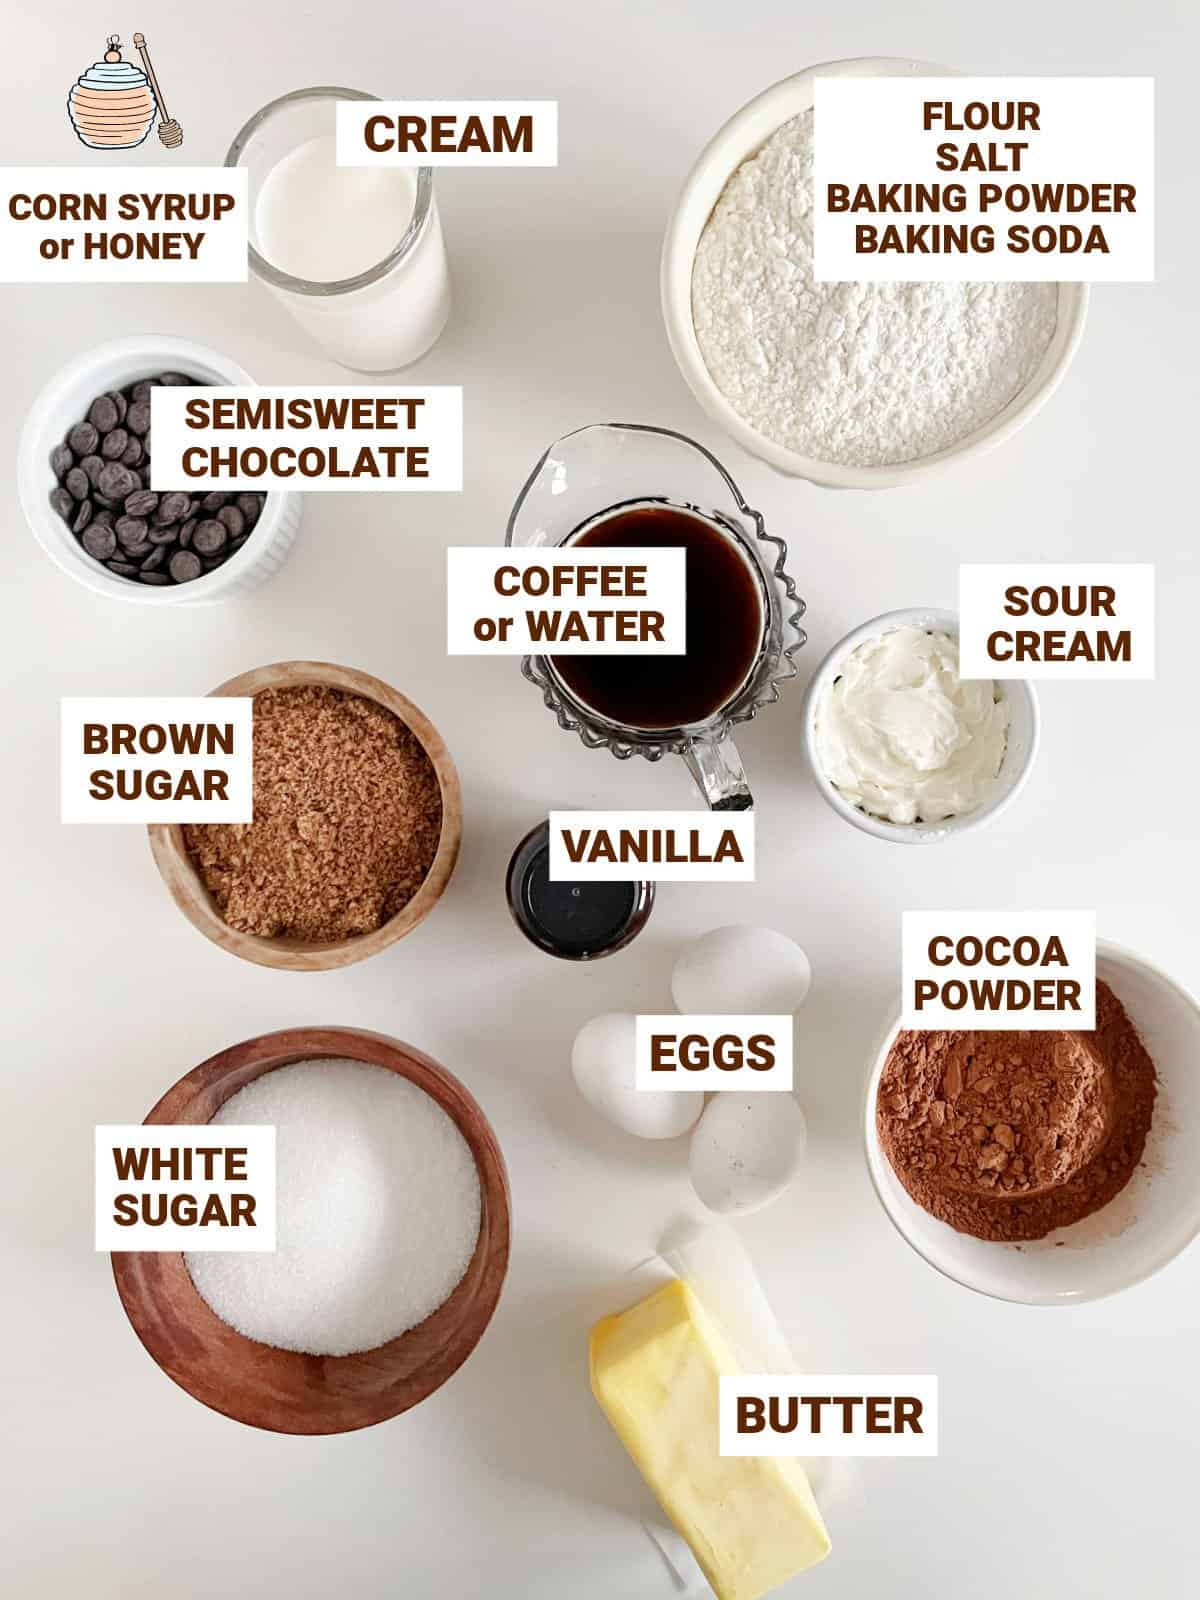 Ingredients for glazed chocolate cake in bowls on white table including cocoa, butter, cream, flour, milk, sugars, coffee, vanilla, sour cream.